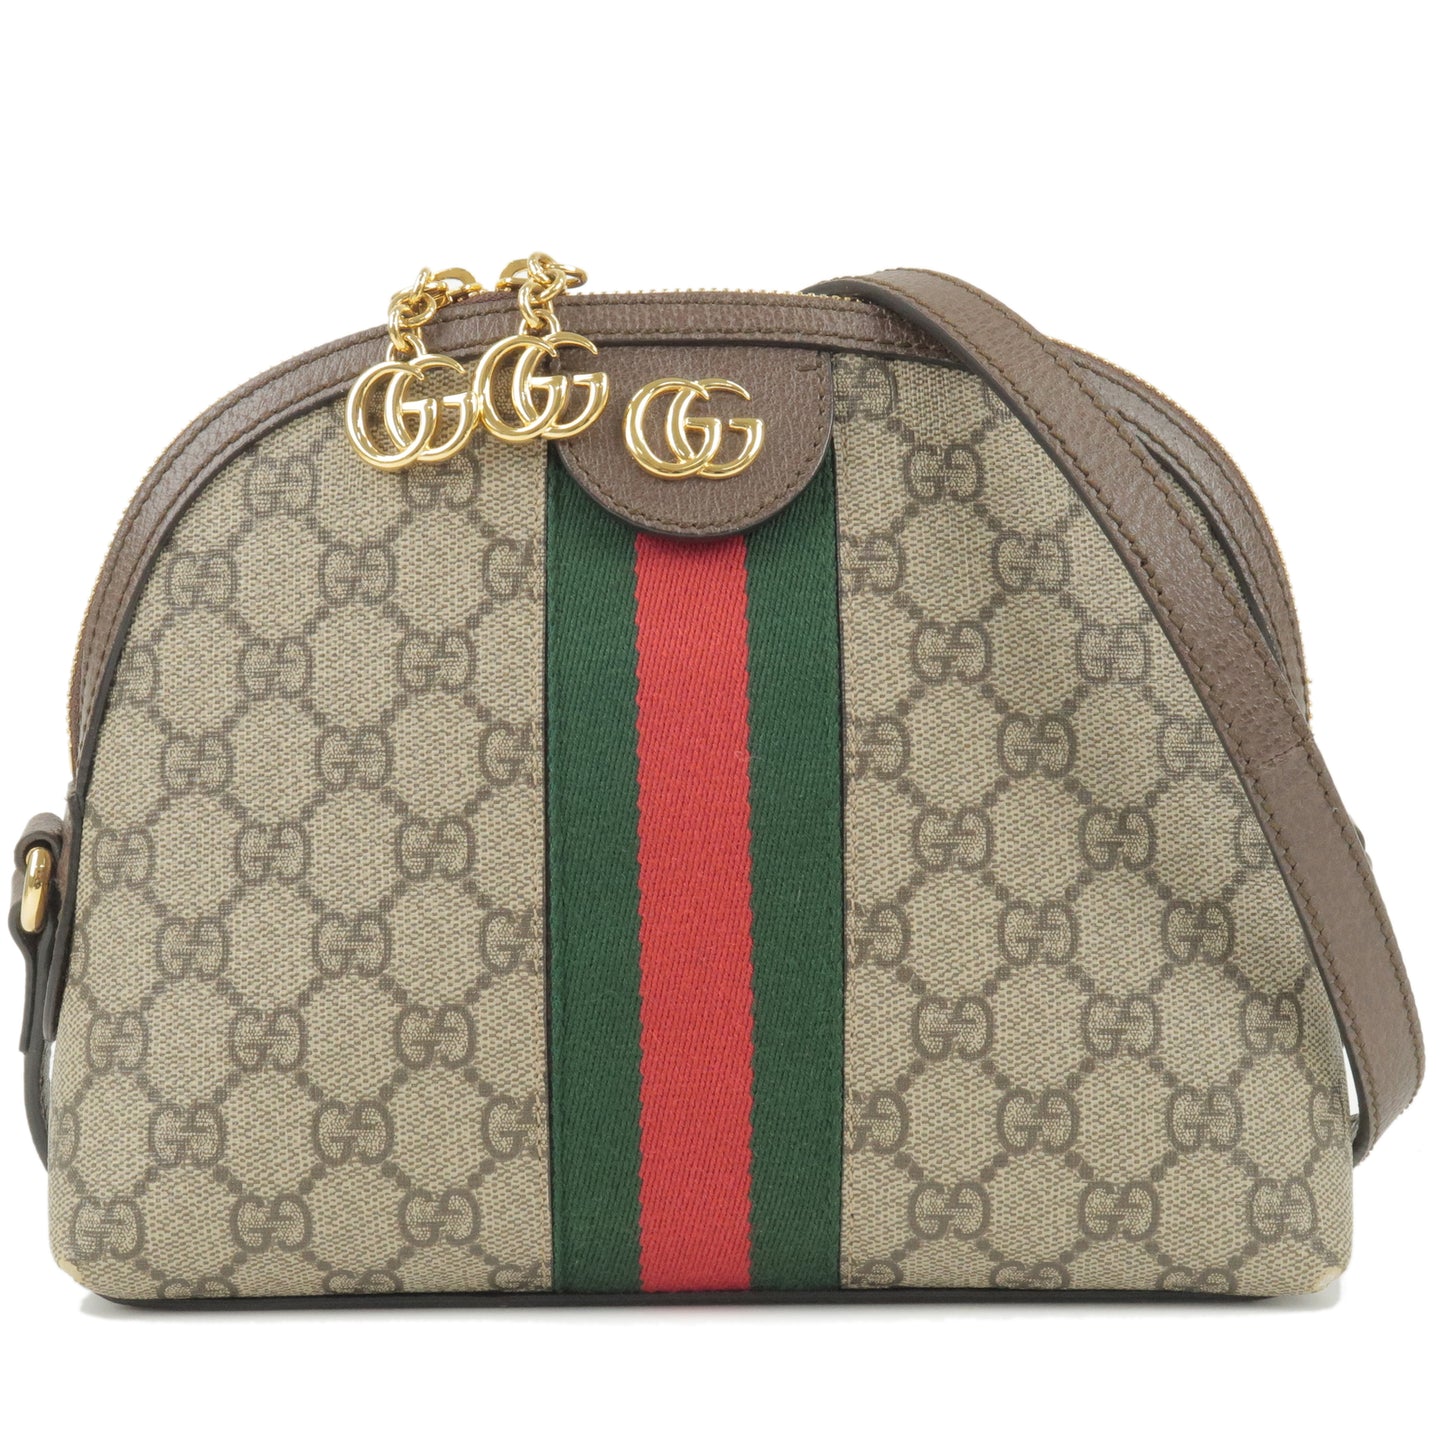 GUCCI-Ophidia-Sherry-GG-Supreme-Leather-Shoulder-Bag-499621